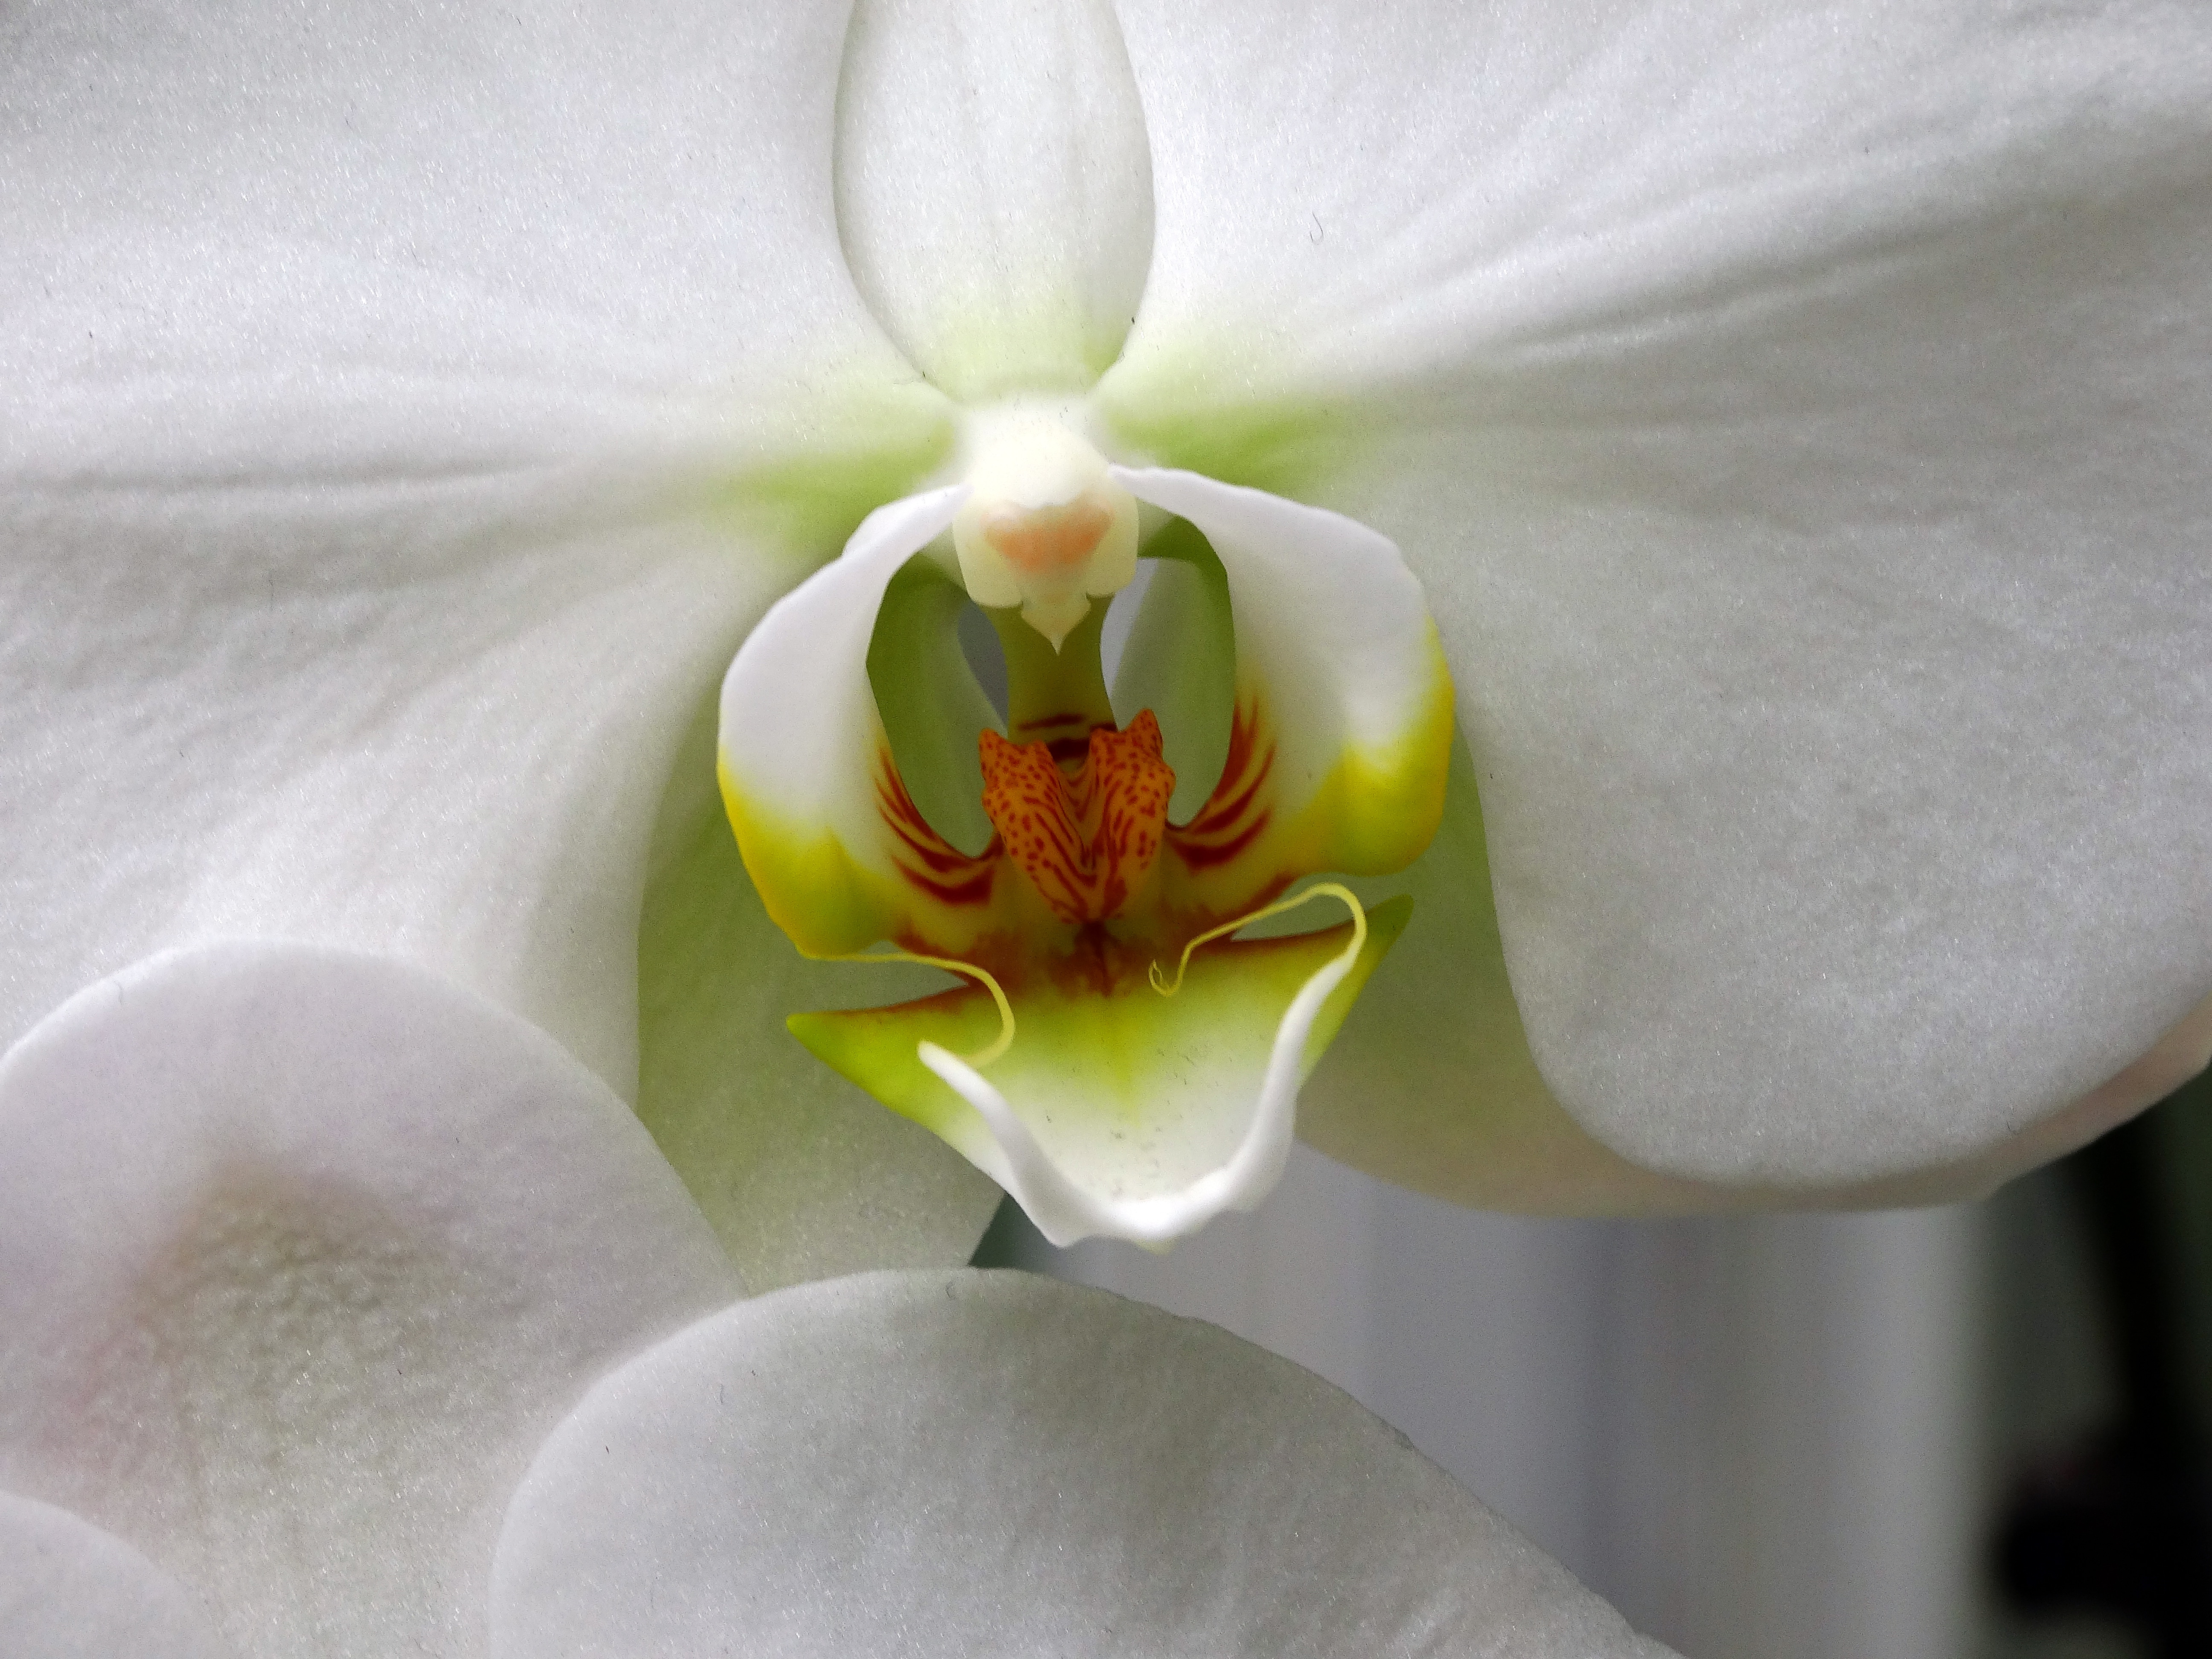 Anatomy of an Orchid